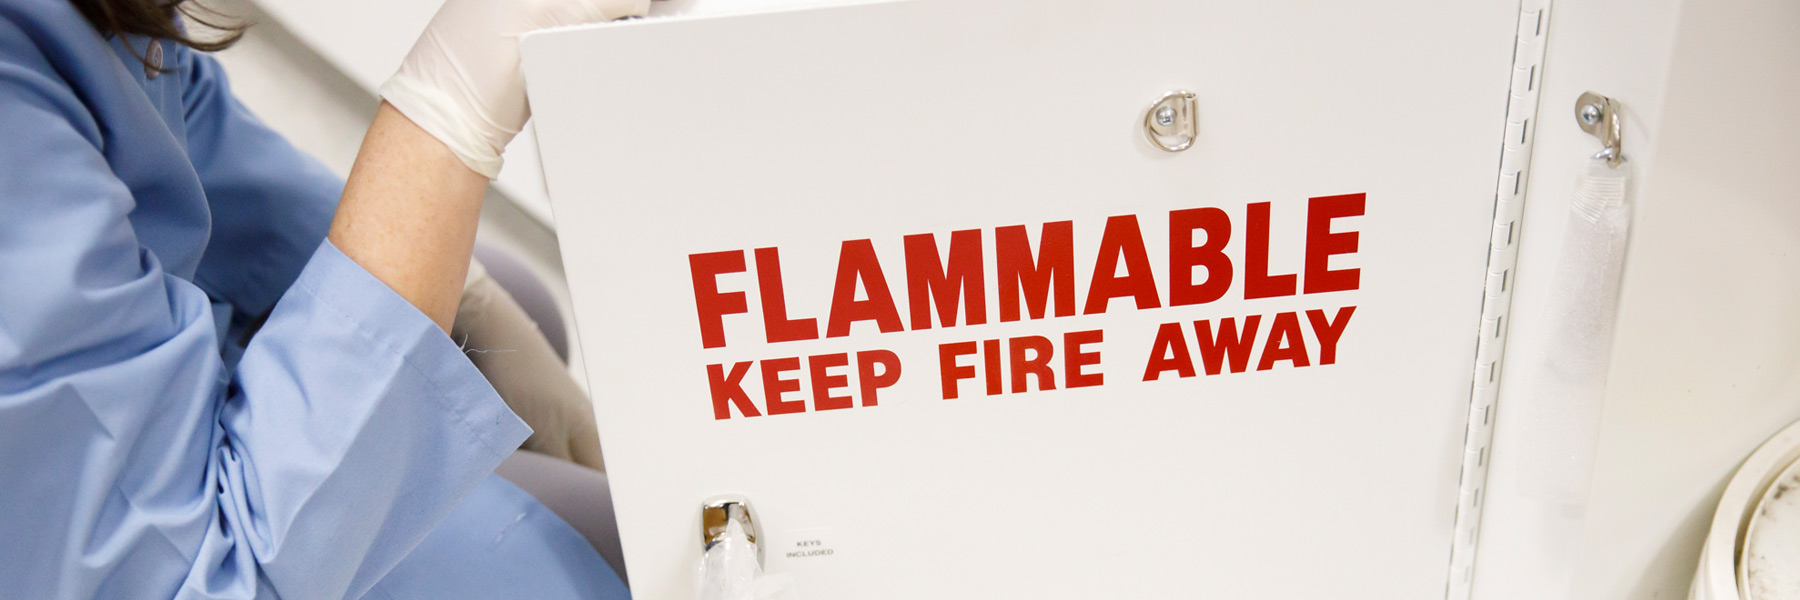 A woman in a lab coat and protective gloves opens a metal cabinet labelled FLAMMABLE KEEP AWAY in bright red letters.